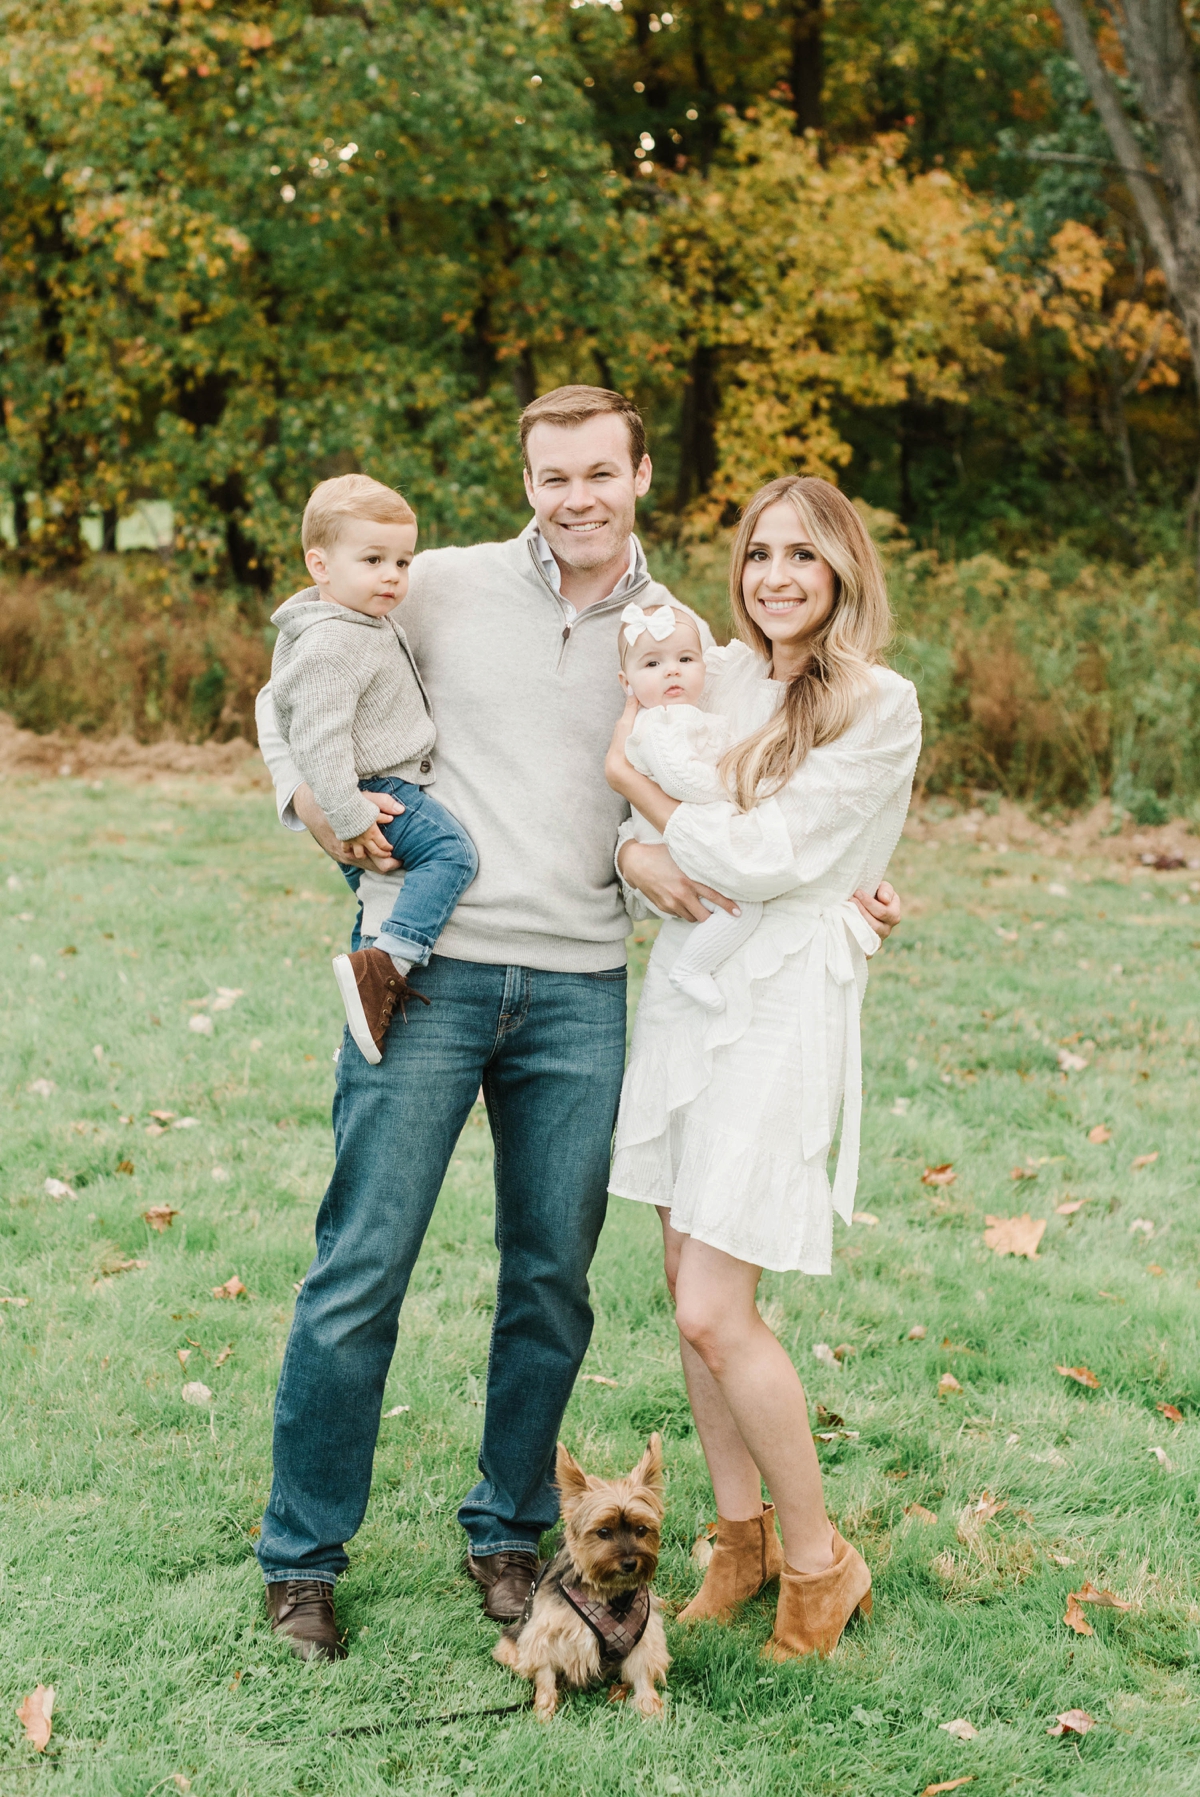 Fall Family Photos at Drummond Park in North Andover, MA by Boston Family Photographer Annmarie Swift